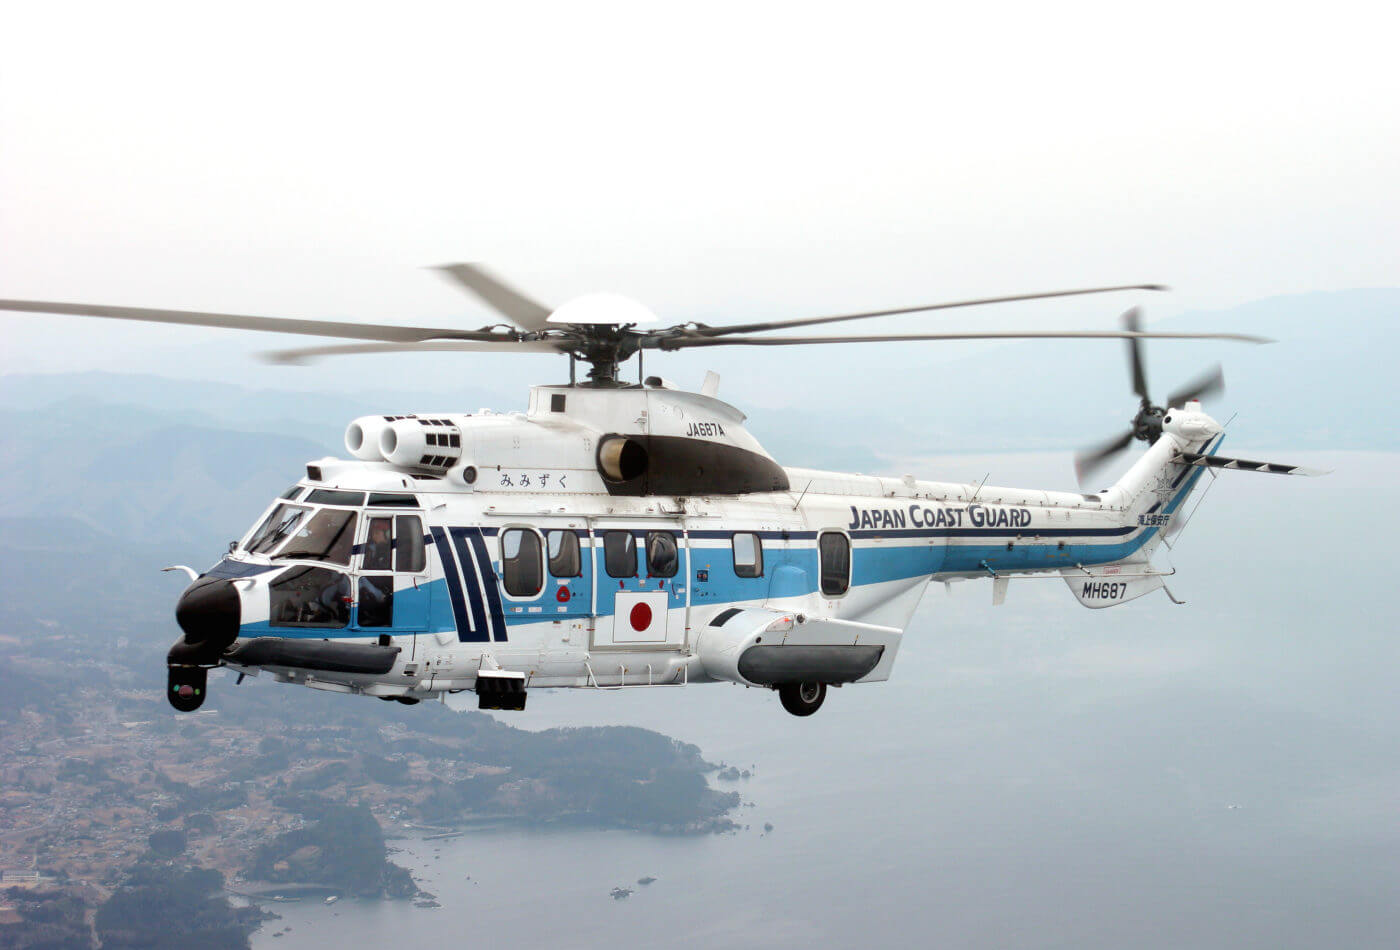 With this new order, the customer’s Super Puma fleet will grow to 13 units by March 2021, becoming the largest Super Puma operator in Japan. Nobuo Oyama Photo